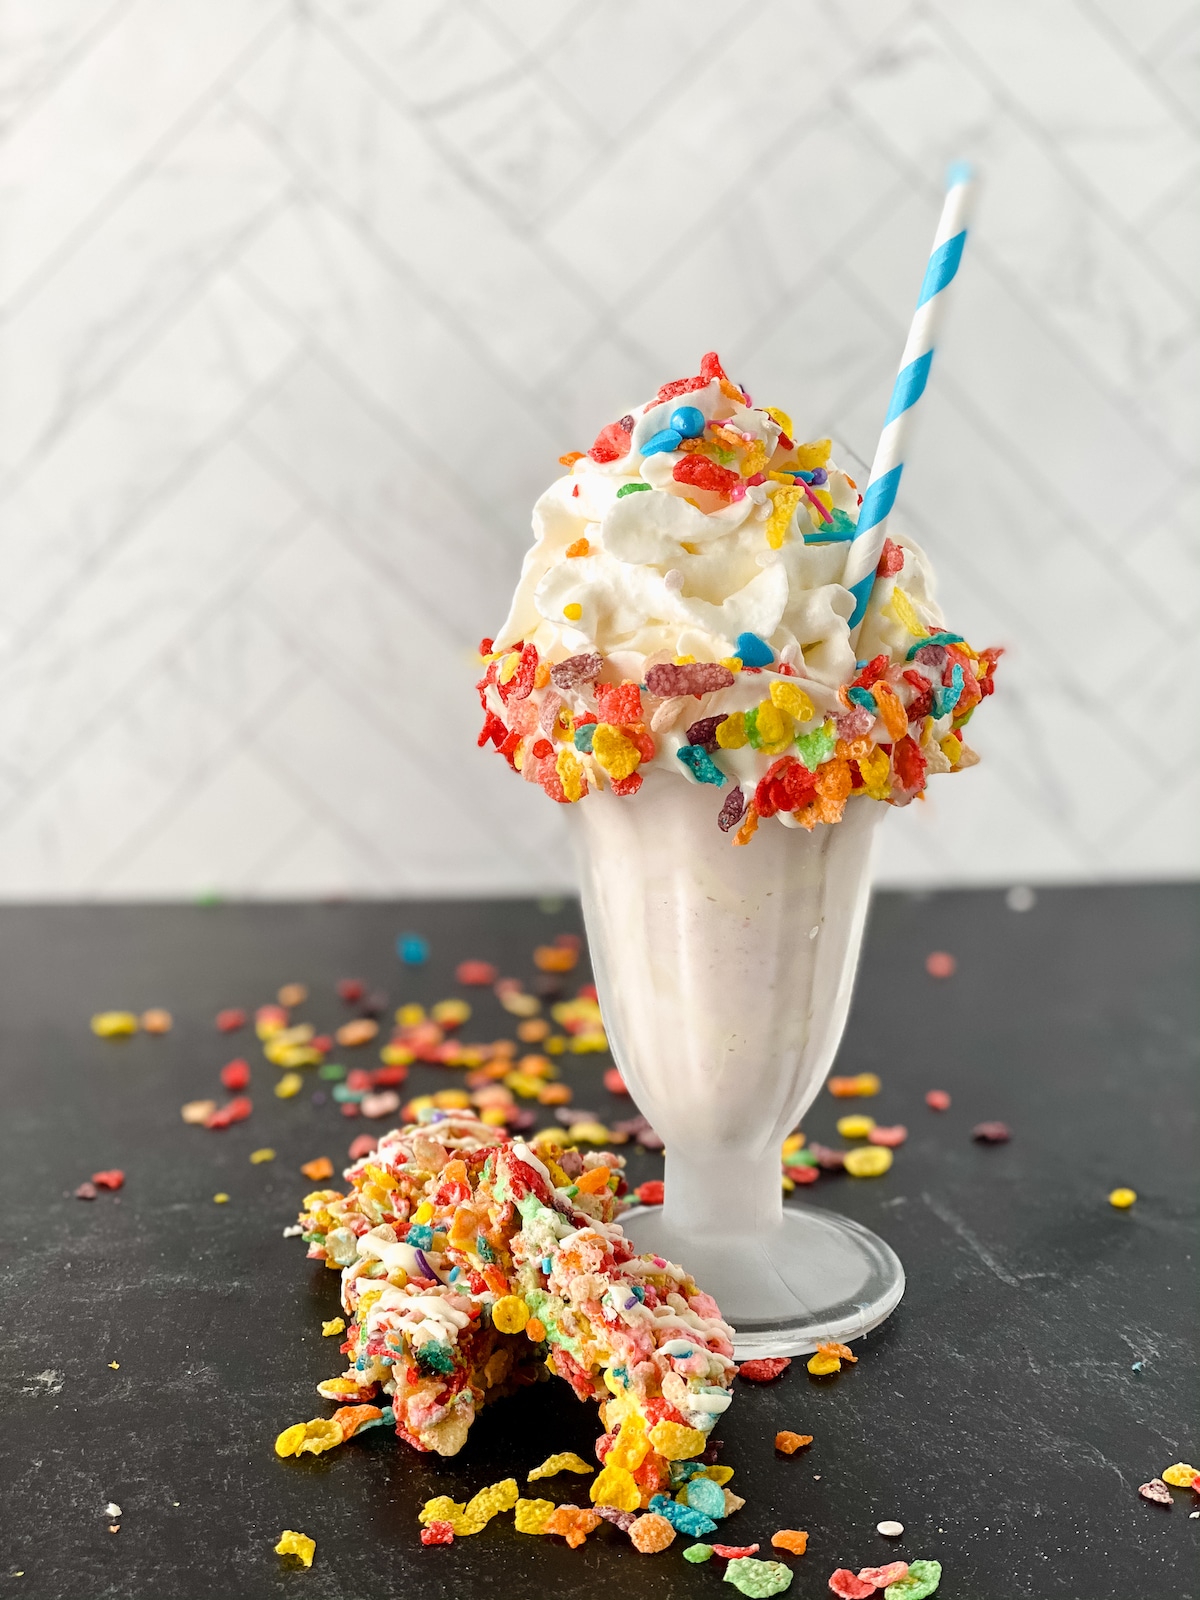 Blue striped paper straw in top of milkshake topped with whipped cream and cereal